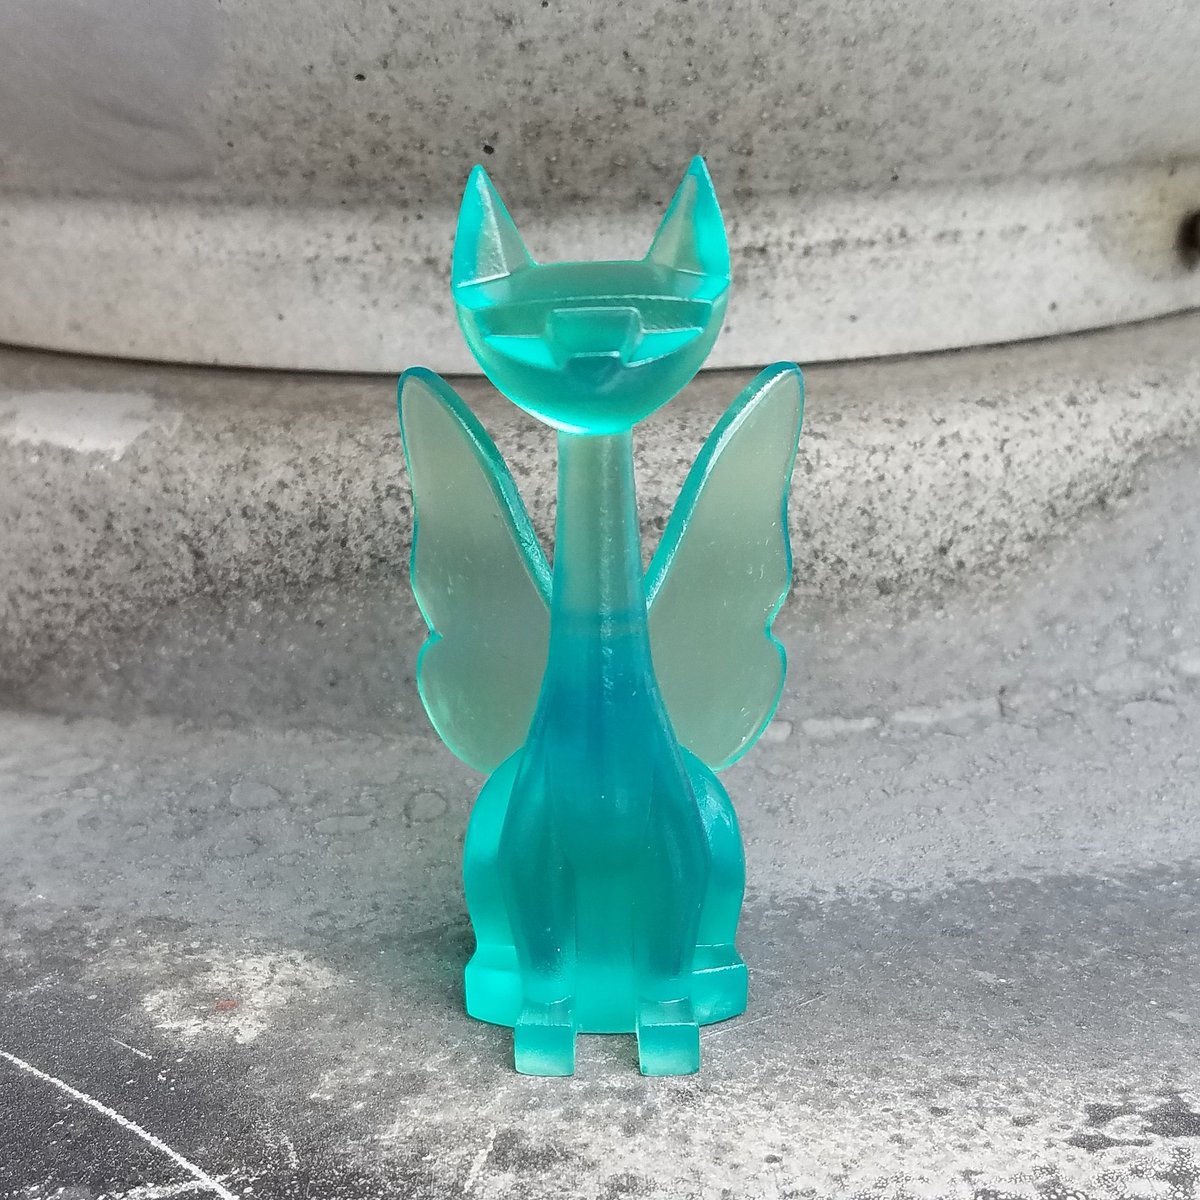 Teal Saturday 
...
#tuttz #fairy #cat #rooftop #photography #art #teal #fauxglass #resin #castings 
#howtobeauty #lovelove #inspired #resinart #stylish #decor #catlife #inthistogether #howifeel #awakening